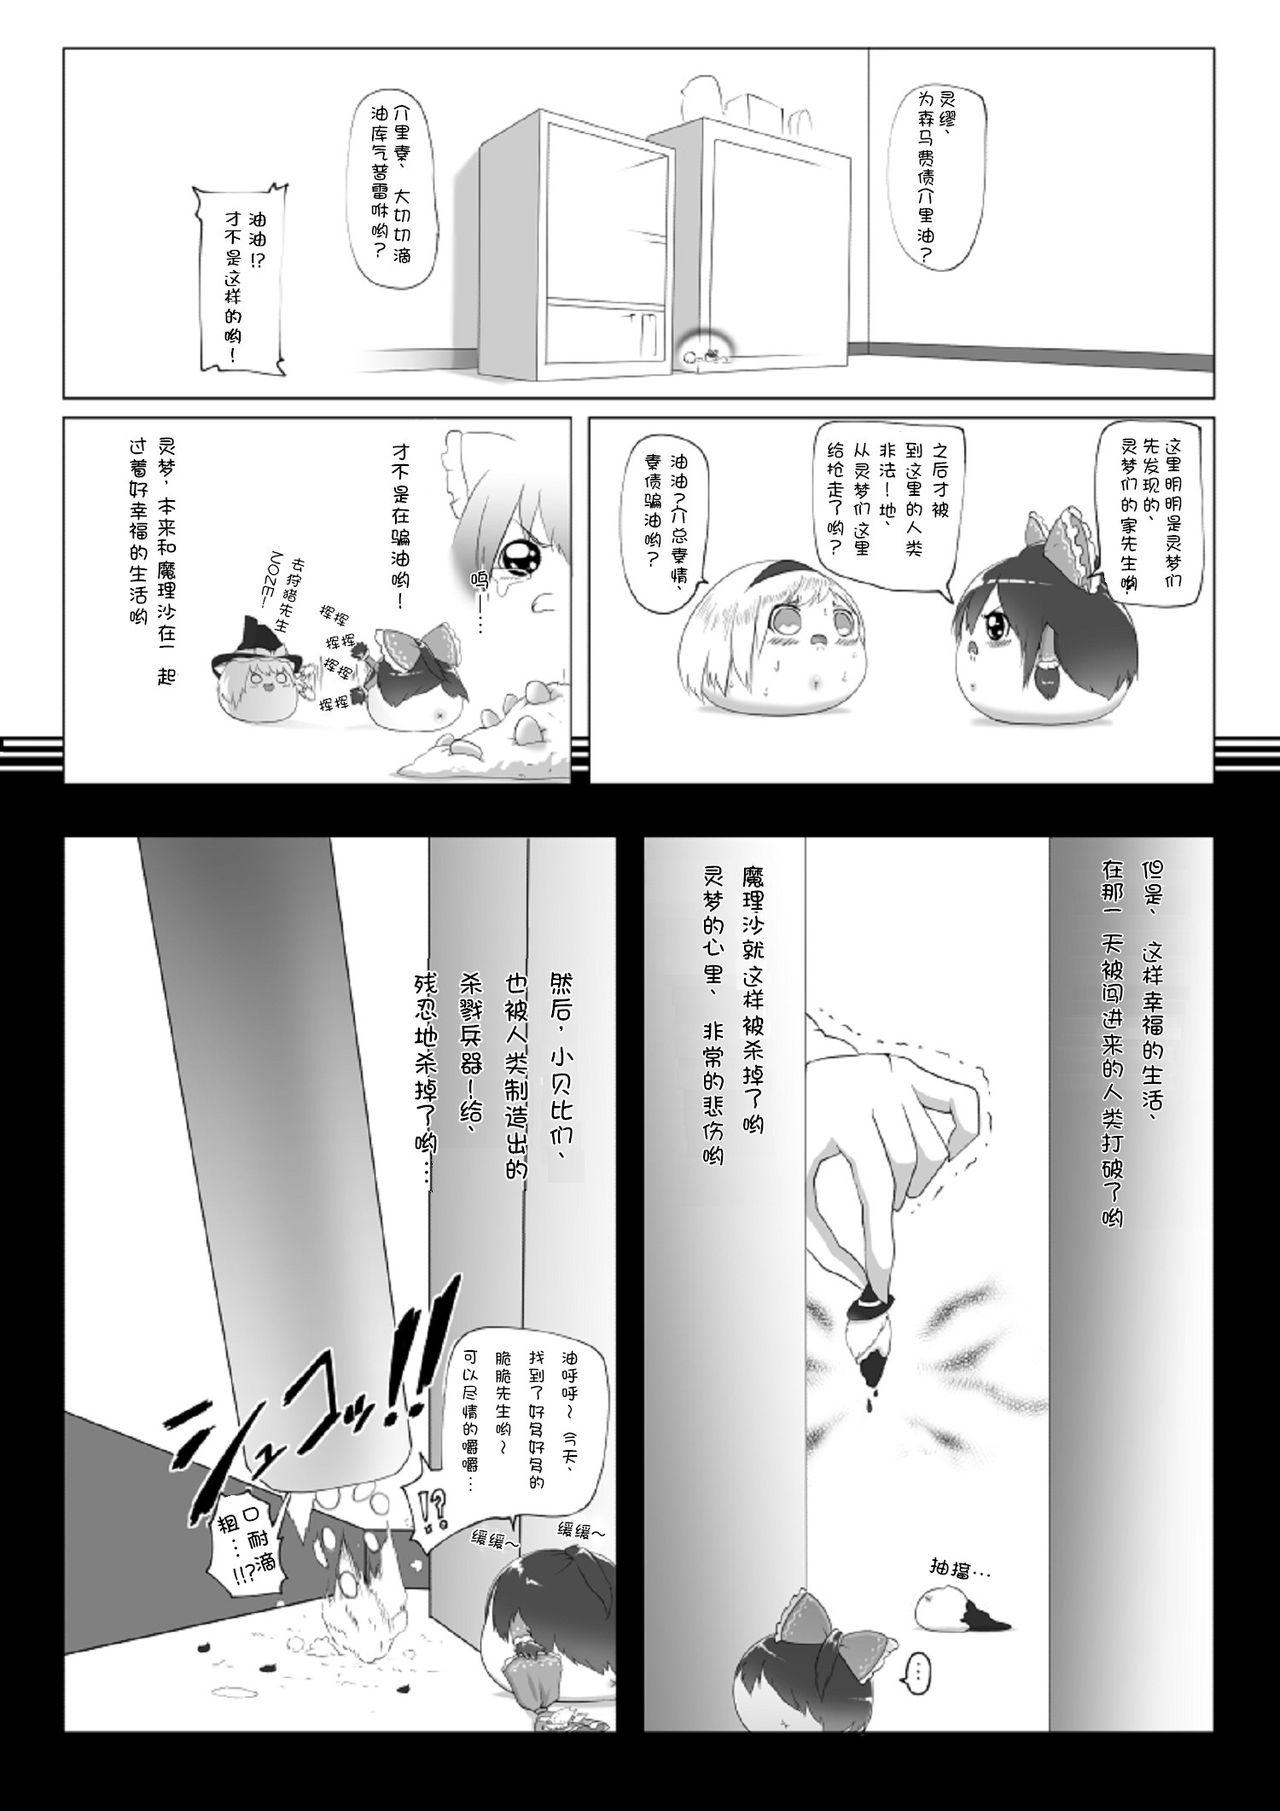 Menage ゆっくりがかってにはえてくるわけ（Chinese) - Touhou project Firsttime - Page 5